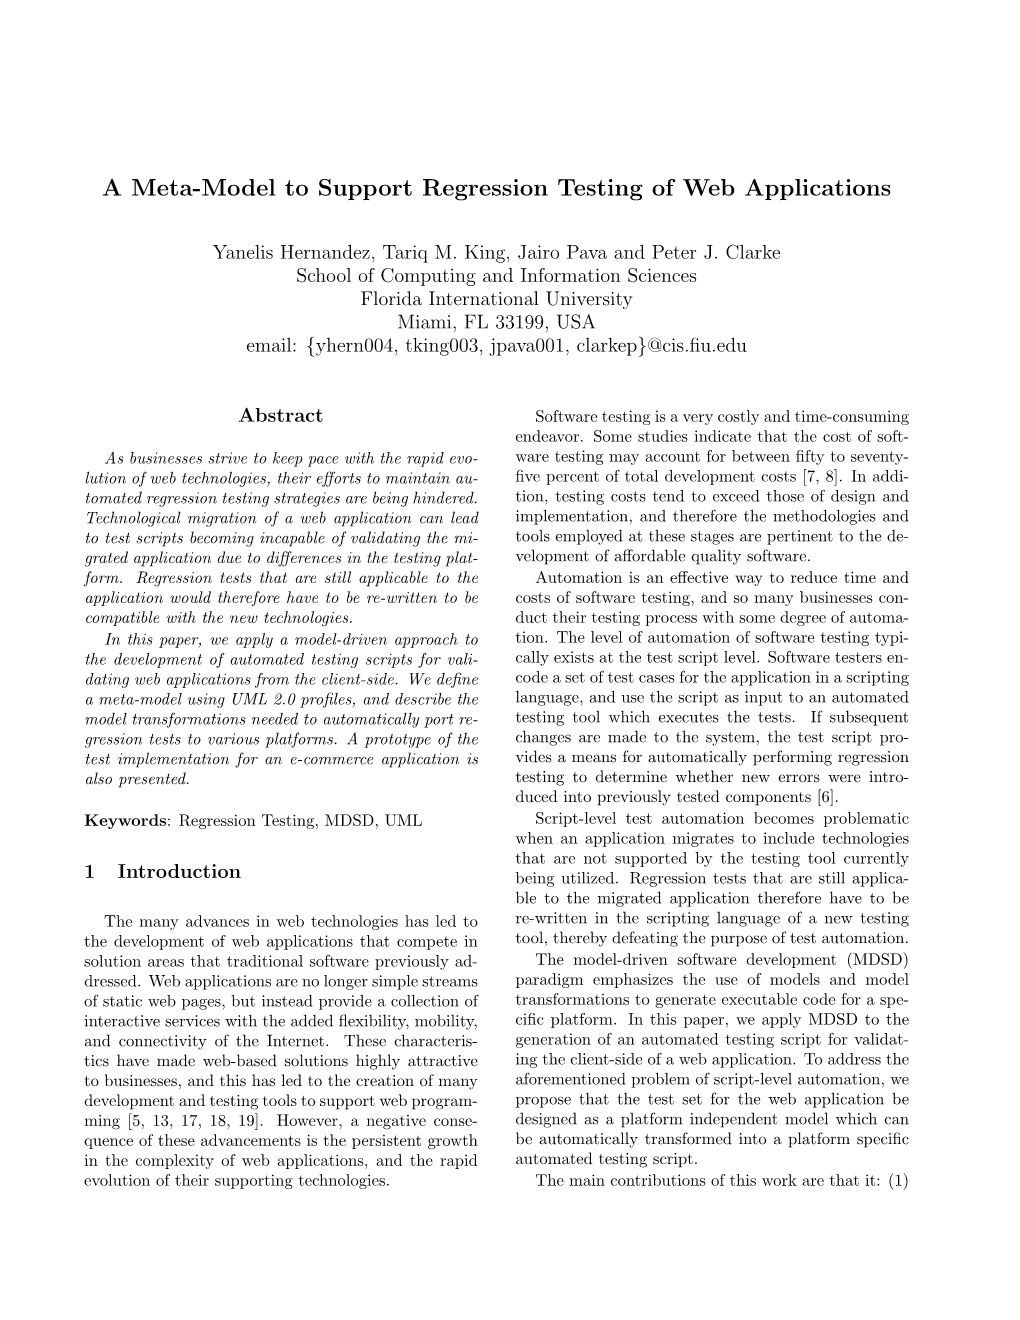 A Meta-Model to Support Regression Testing of Web Applications